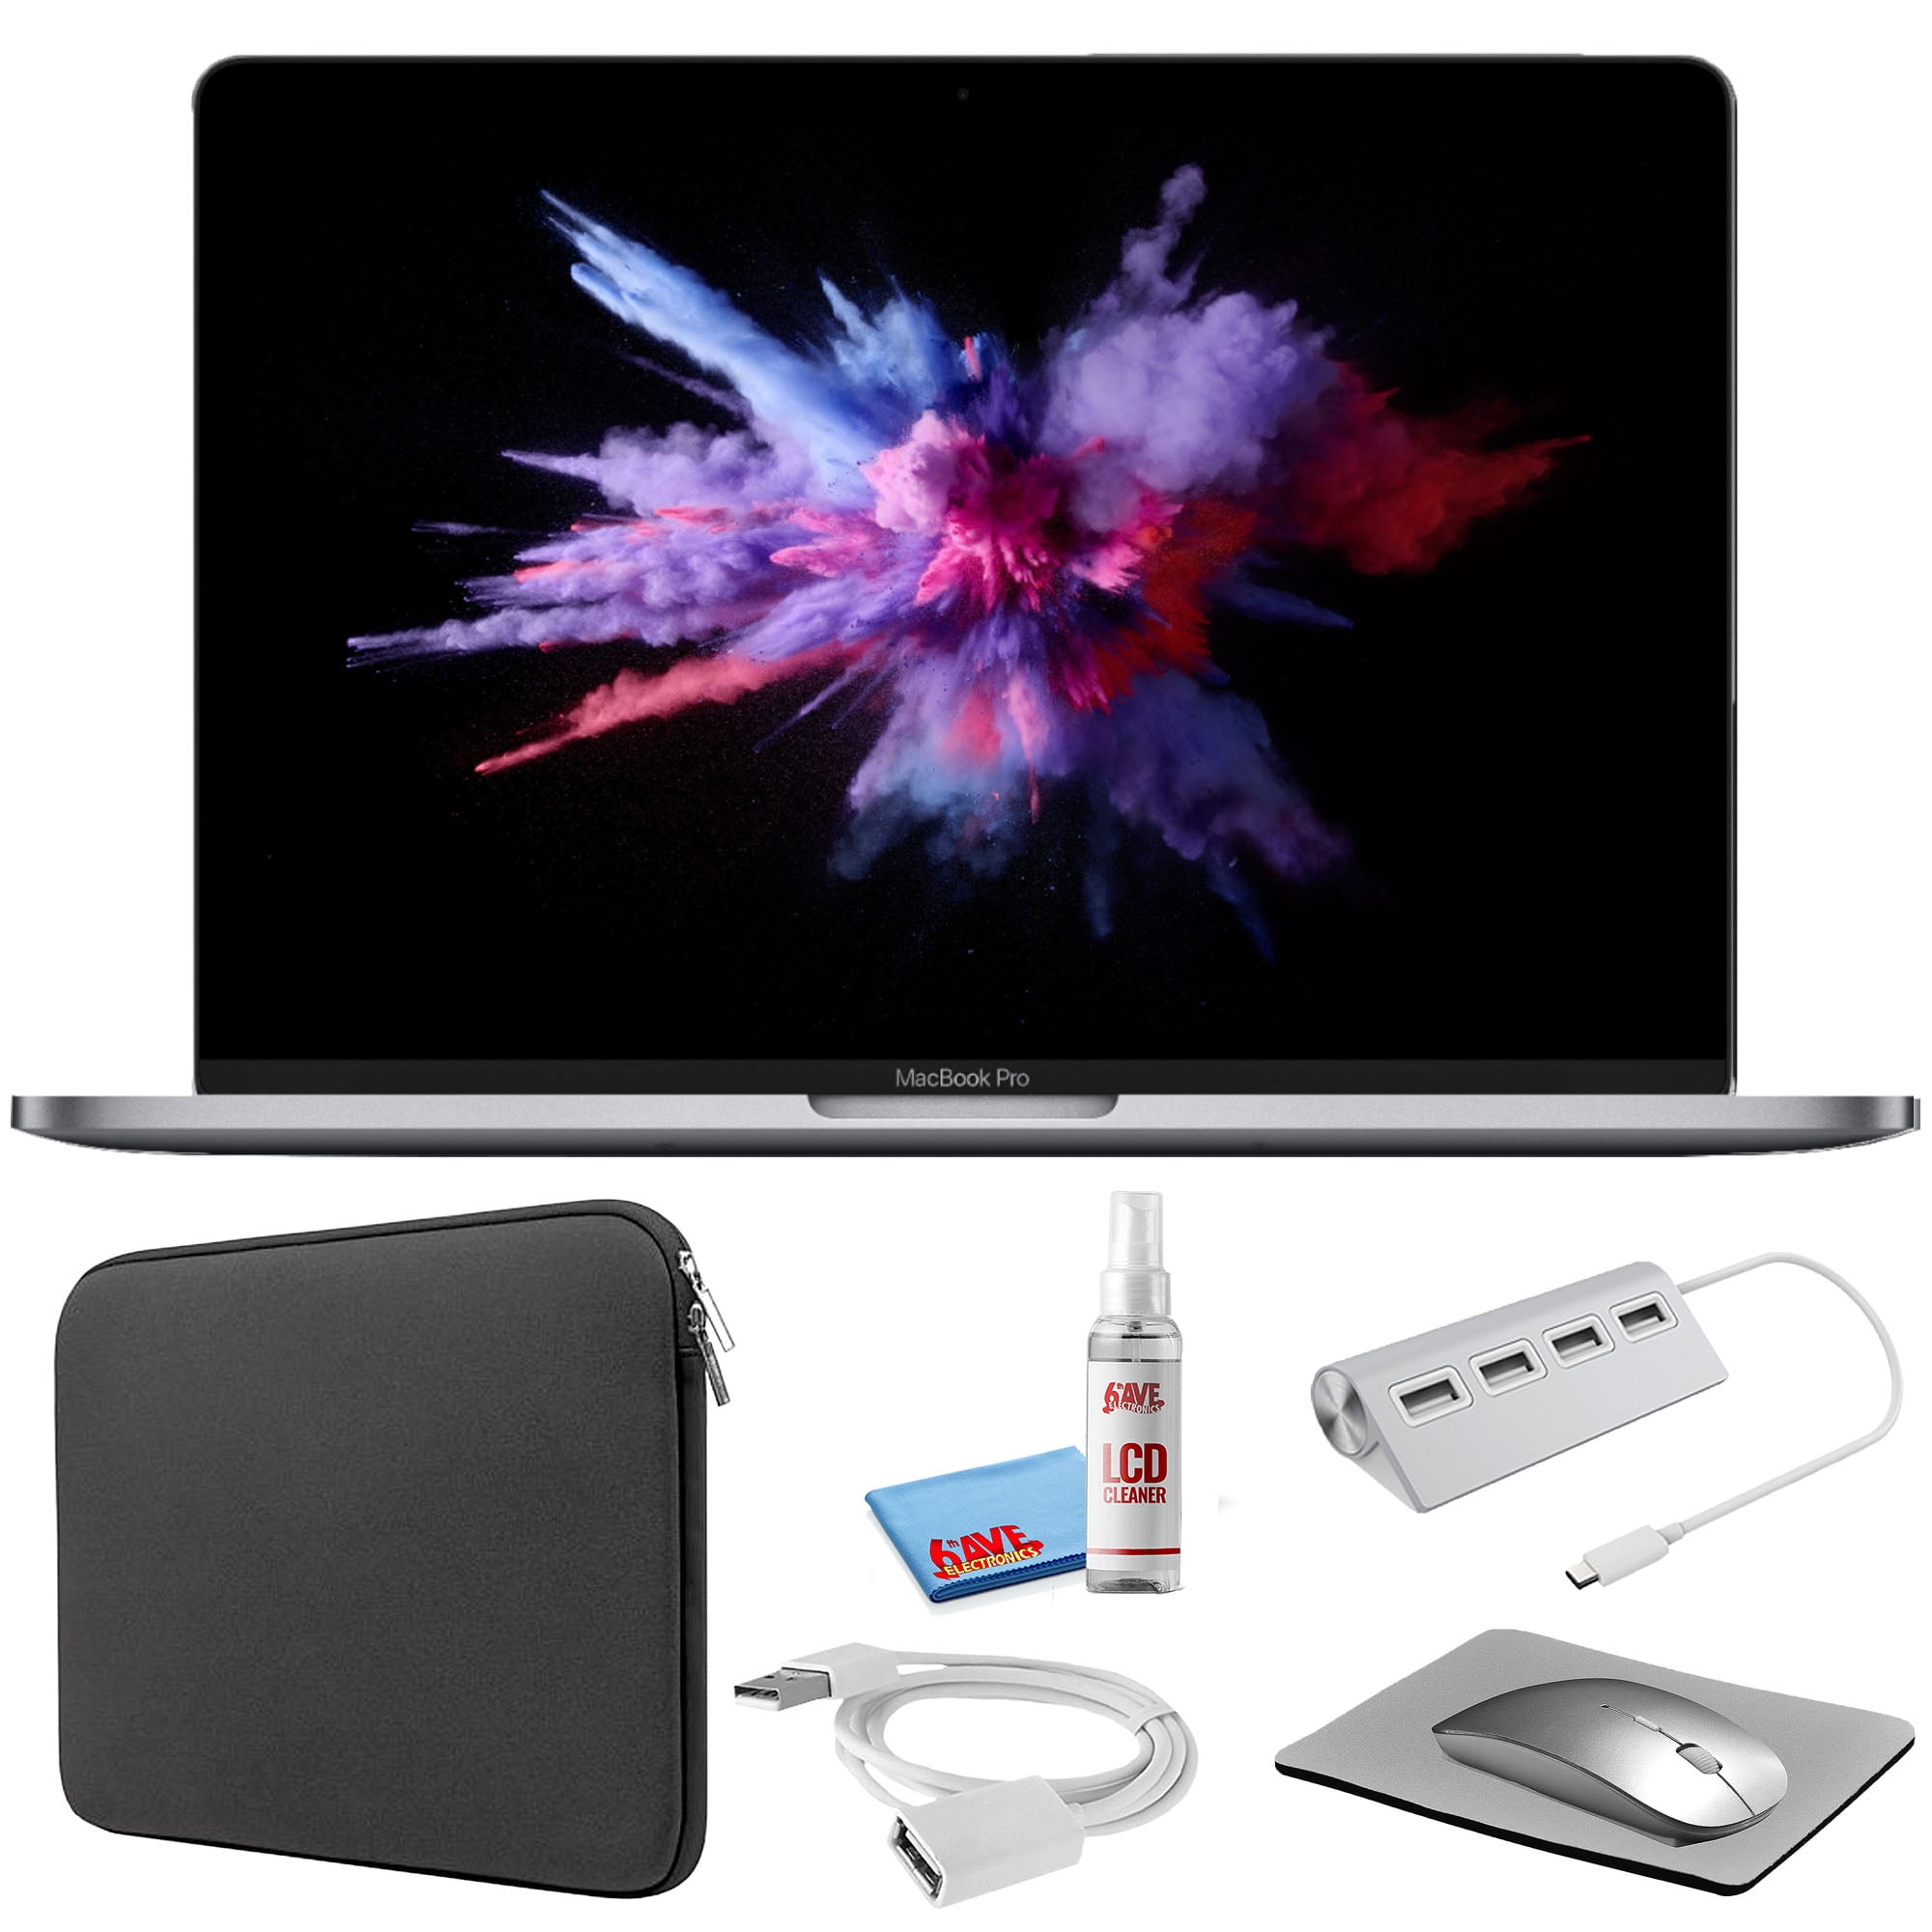 Apple MacBook Pro 13-inch (i5 1.4GHz, 128GB SSD) (Mid 2019, MUHN2LL/A) -  Space Gray Bundle with Black Zipper Sleeve + Laptop Starter Kit + Cleaning  